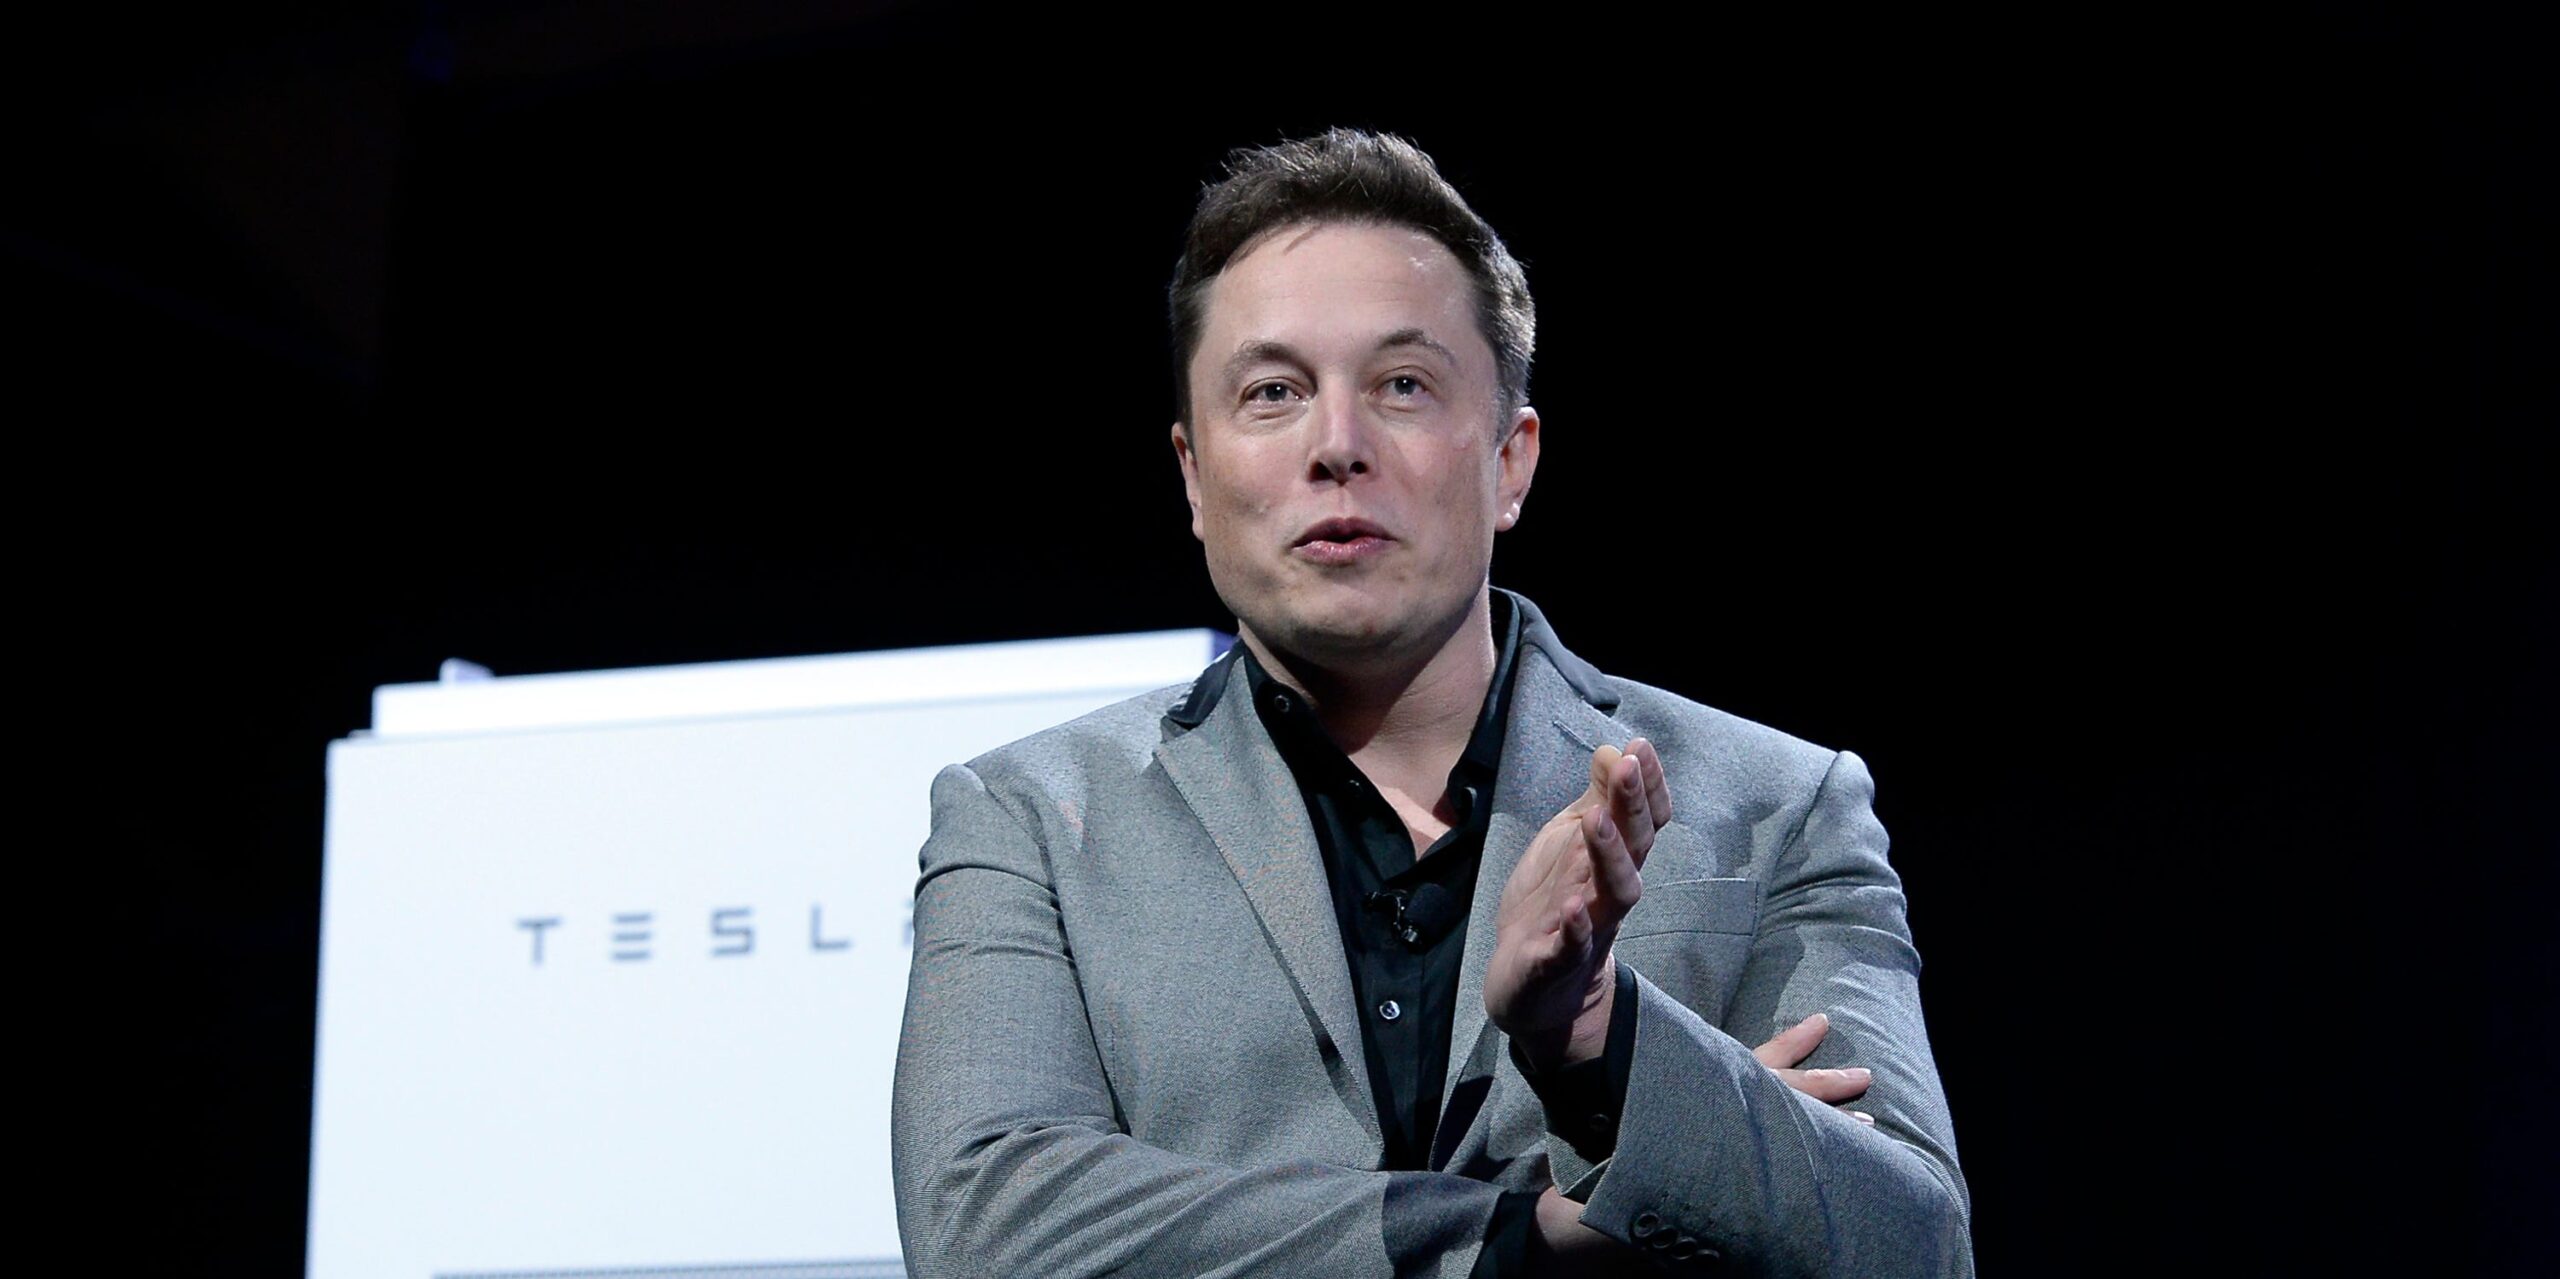 Texas police will demand Tesla hands over data from a fatal crash, after Elon Musk denied the car was running on Autopilot